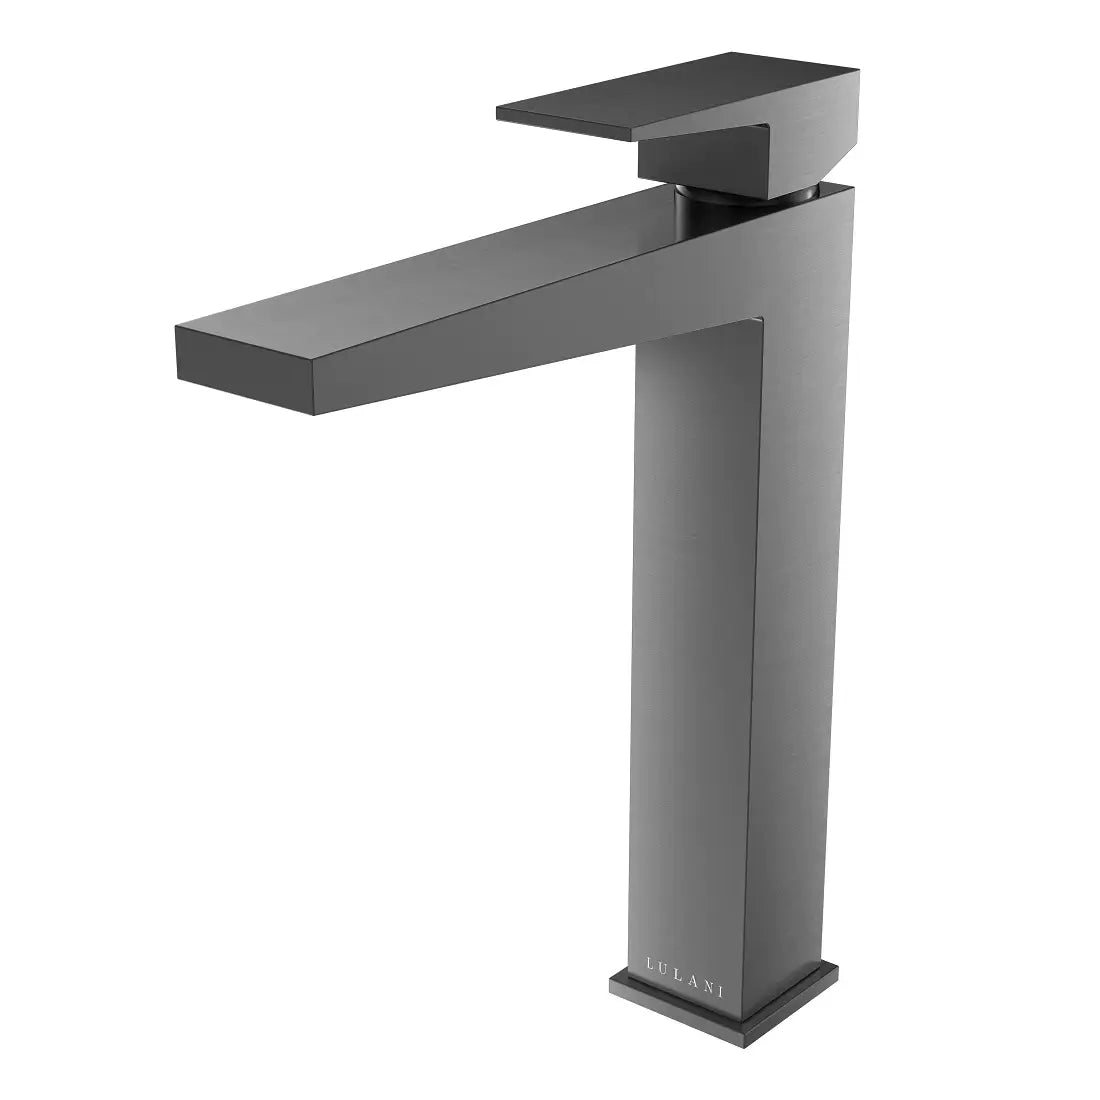 Boracay - Vessel Style Bathroom Faucet with drain assembly